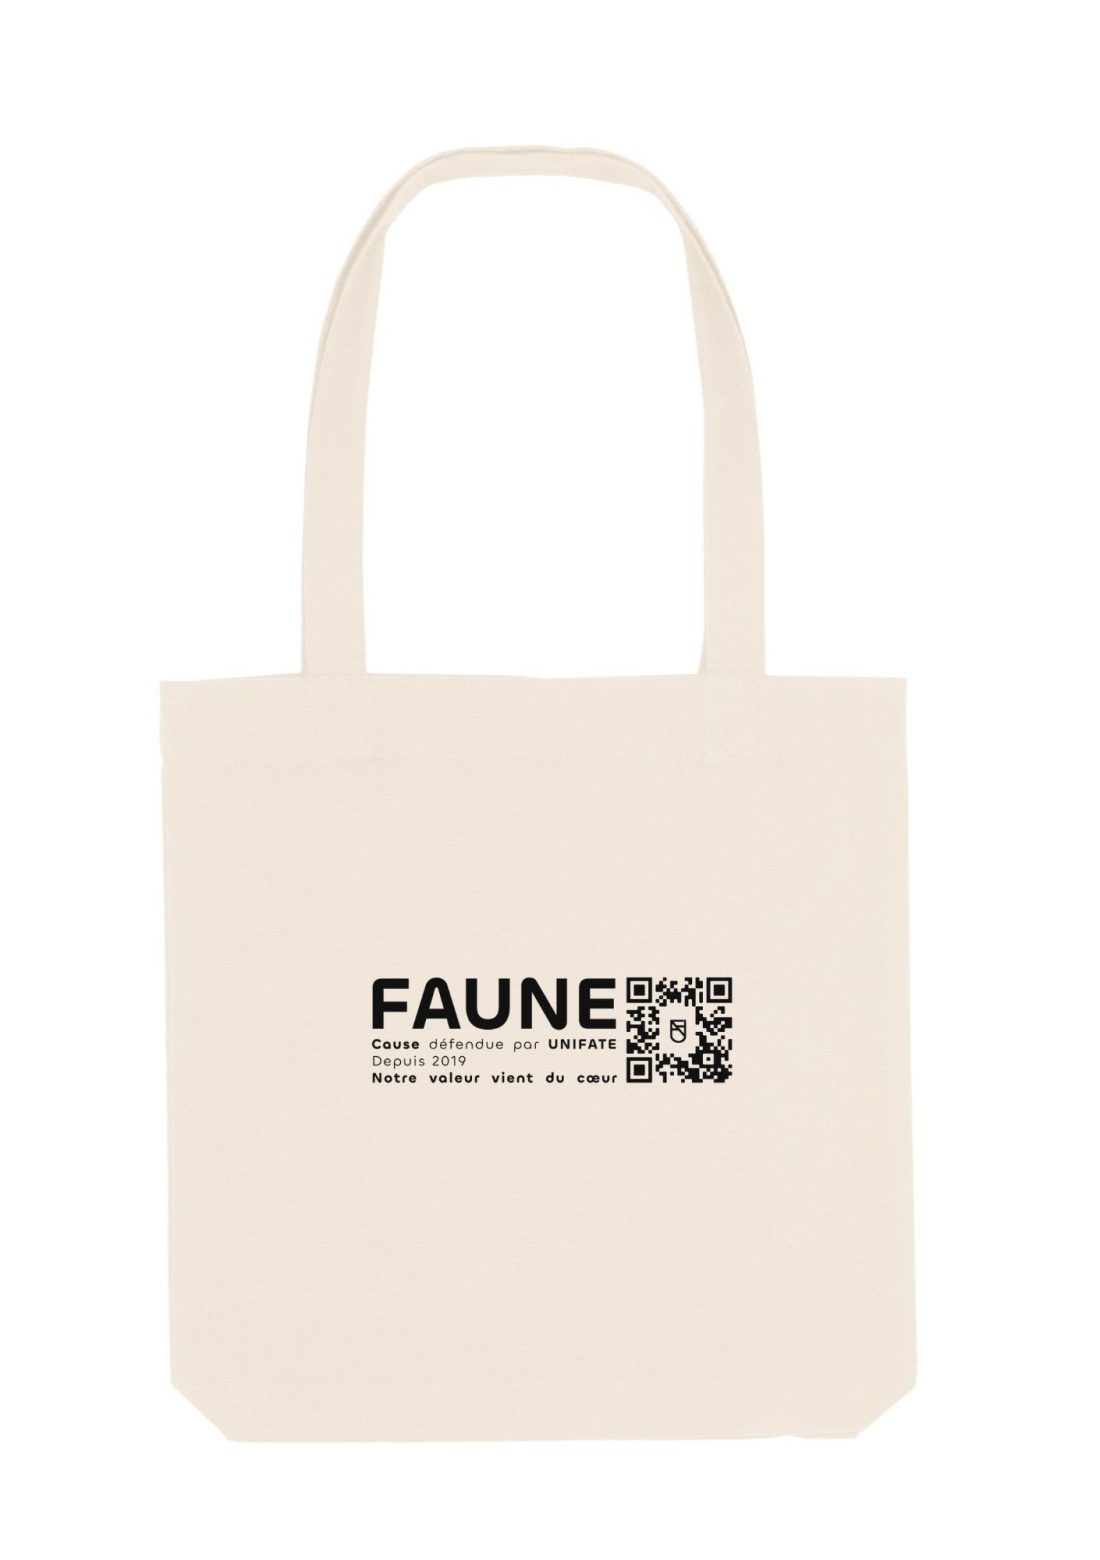 unifate-marque-responsable-rennes-collection-faune-ete-tote-bag-blanc-verso